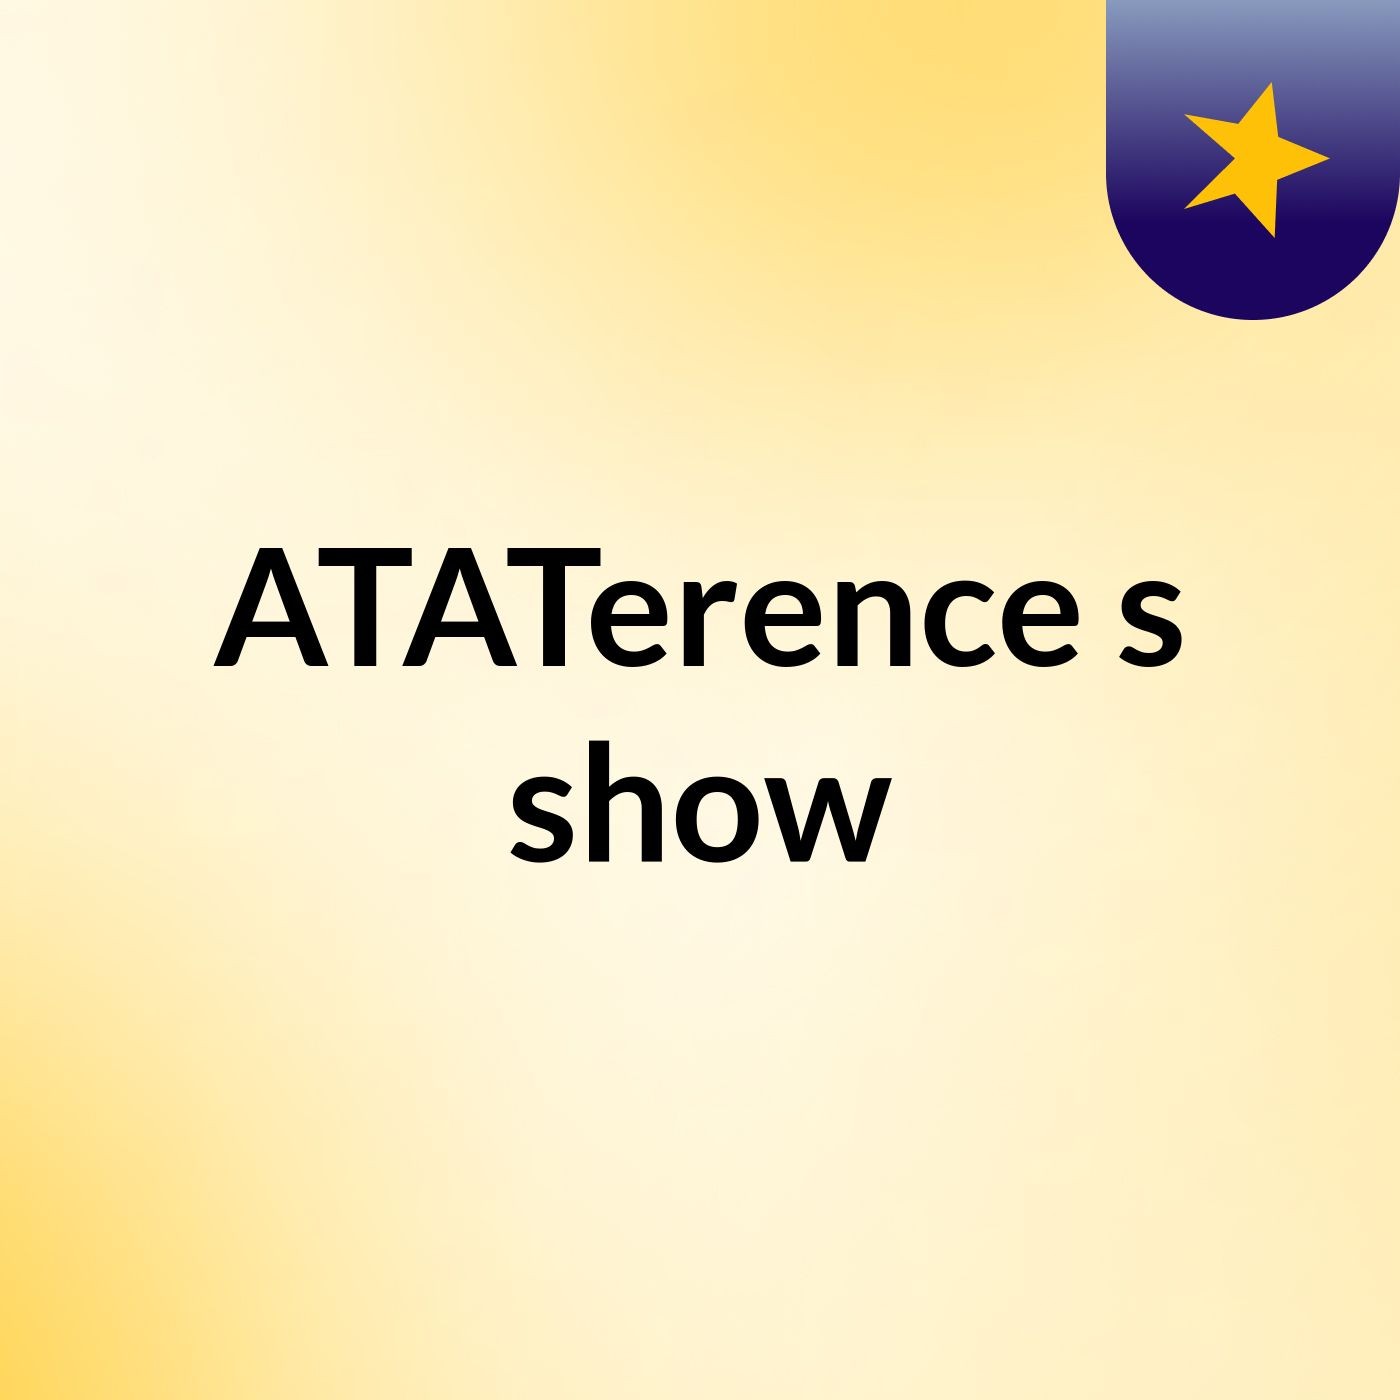 ATATerence's show